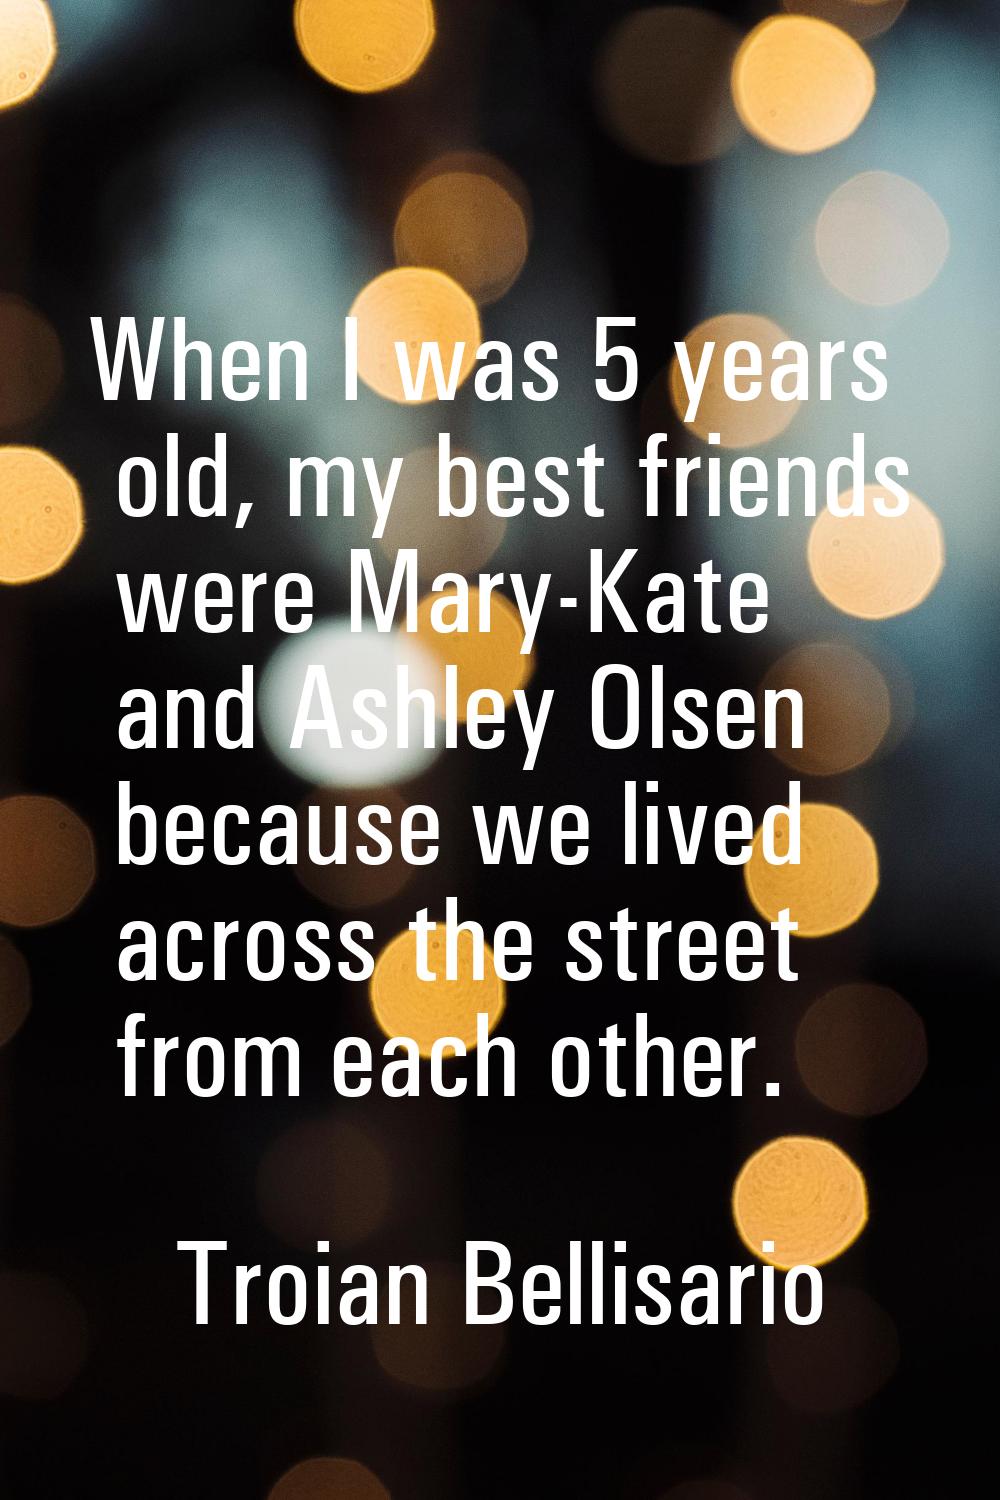 When I was 5 years old, my best friends were Mary-Kate and Ashley Olsen because we lived across the